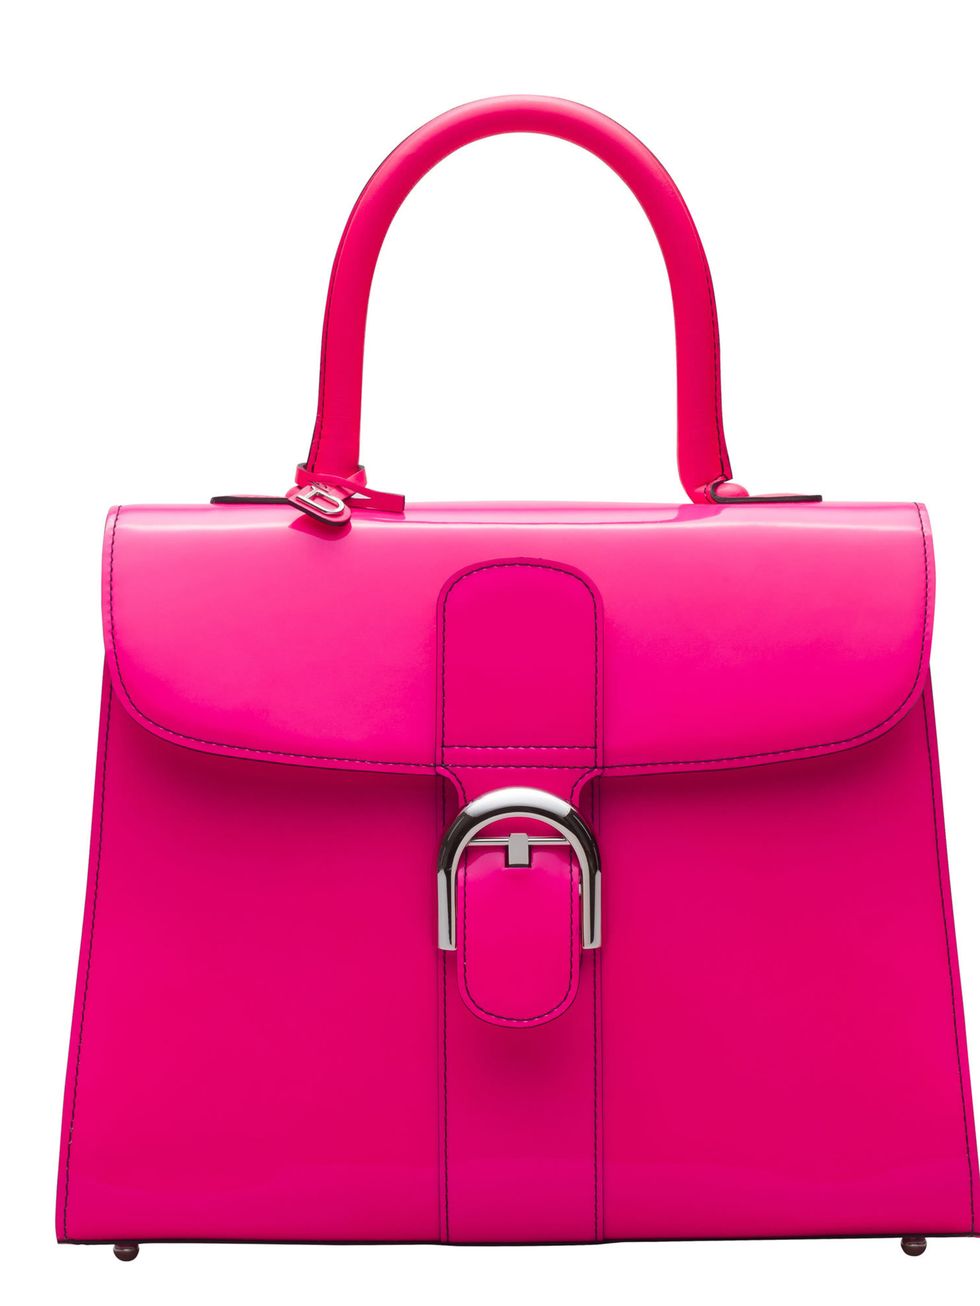 Product, Bag, Red, Magenta, Pink, Style, Luggage and bags, Shoulder bag, Purple, Maroon, 